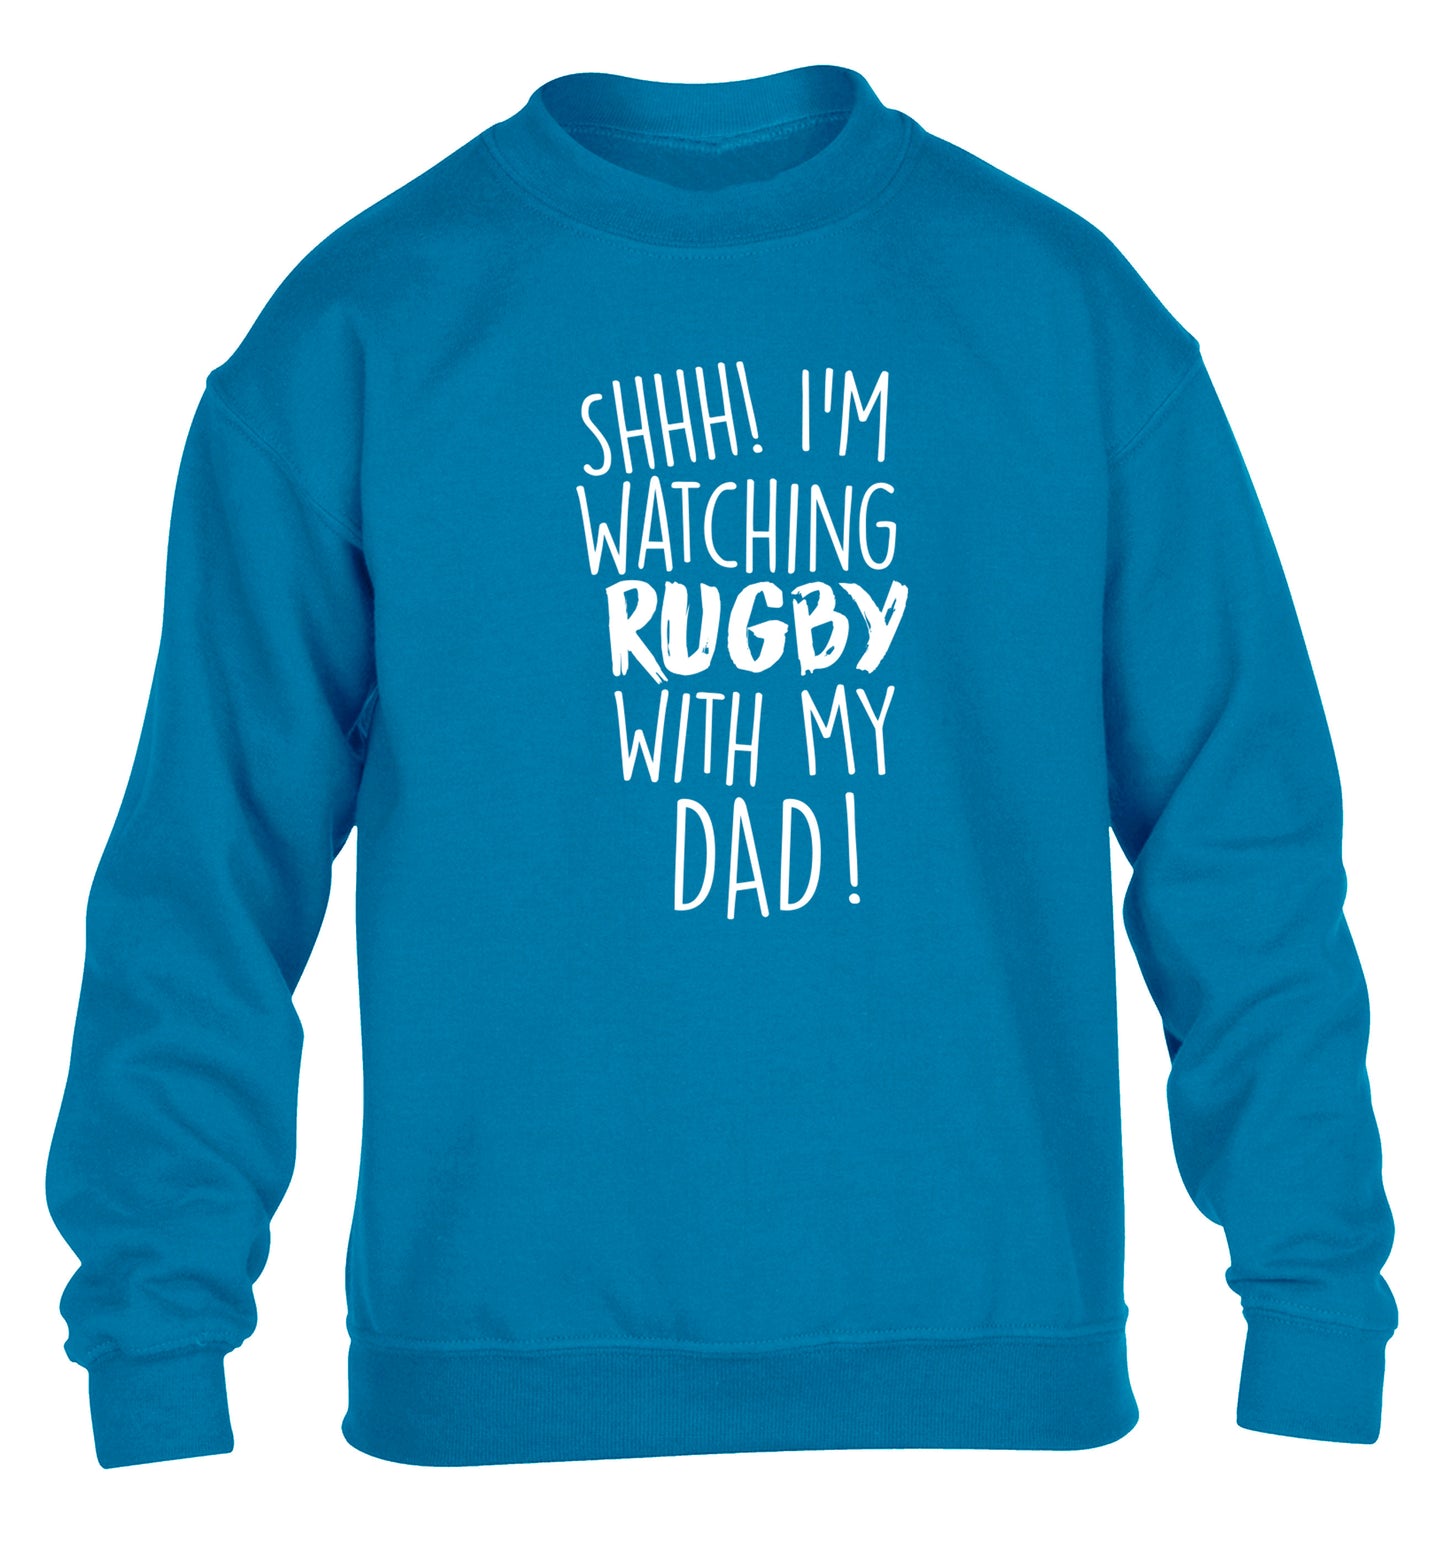 Shh... I'm watching rugby with my dad children's blue sweater 12-13 Years